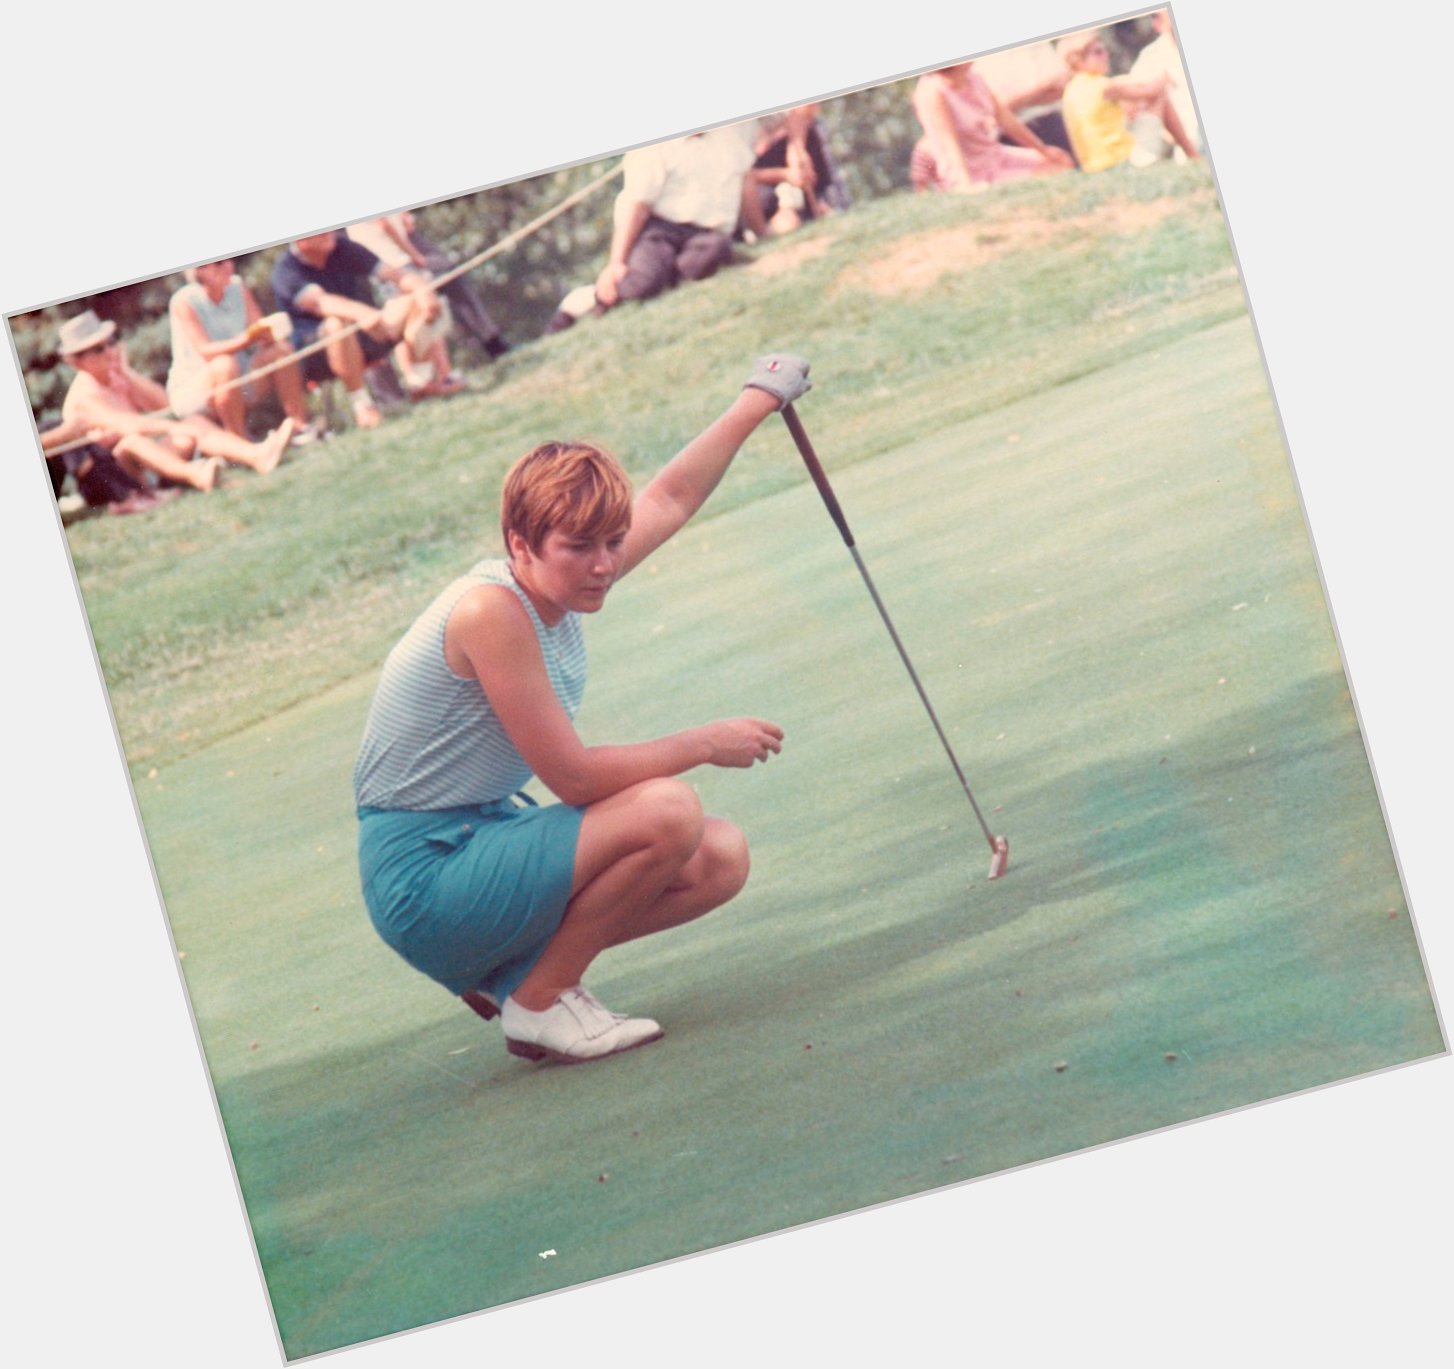 Happy 70th Birthday to Sandra Post! She is not only an amazing golfer but also a fantastic role model 